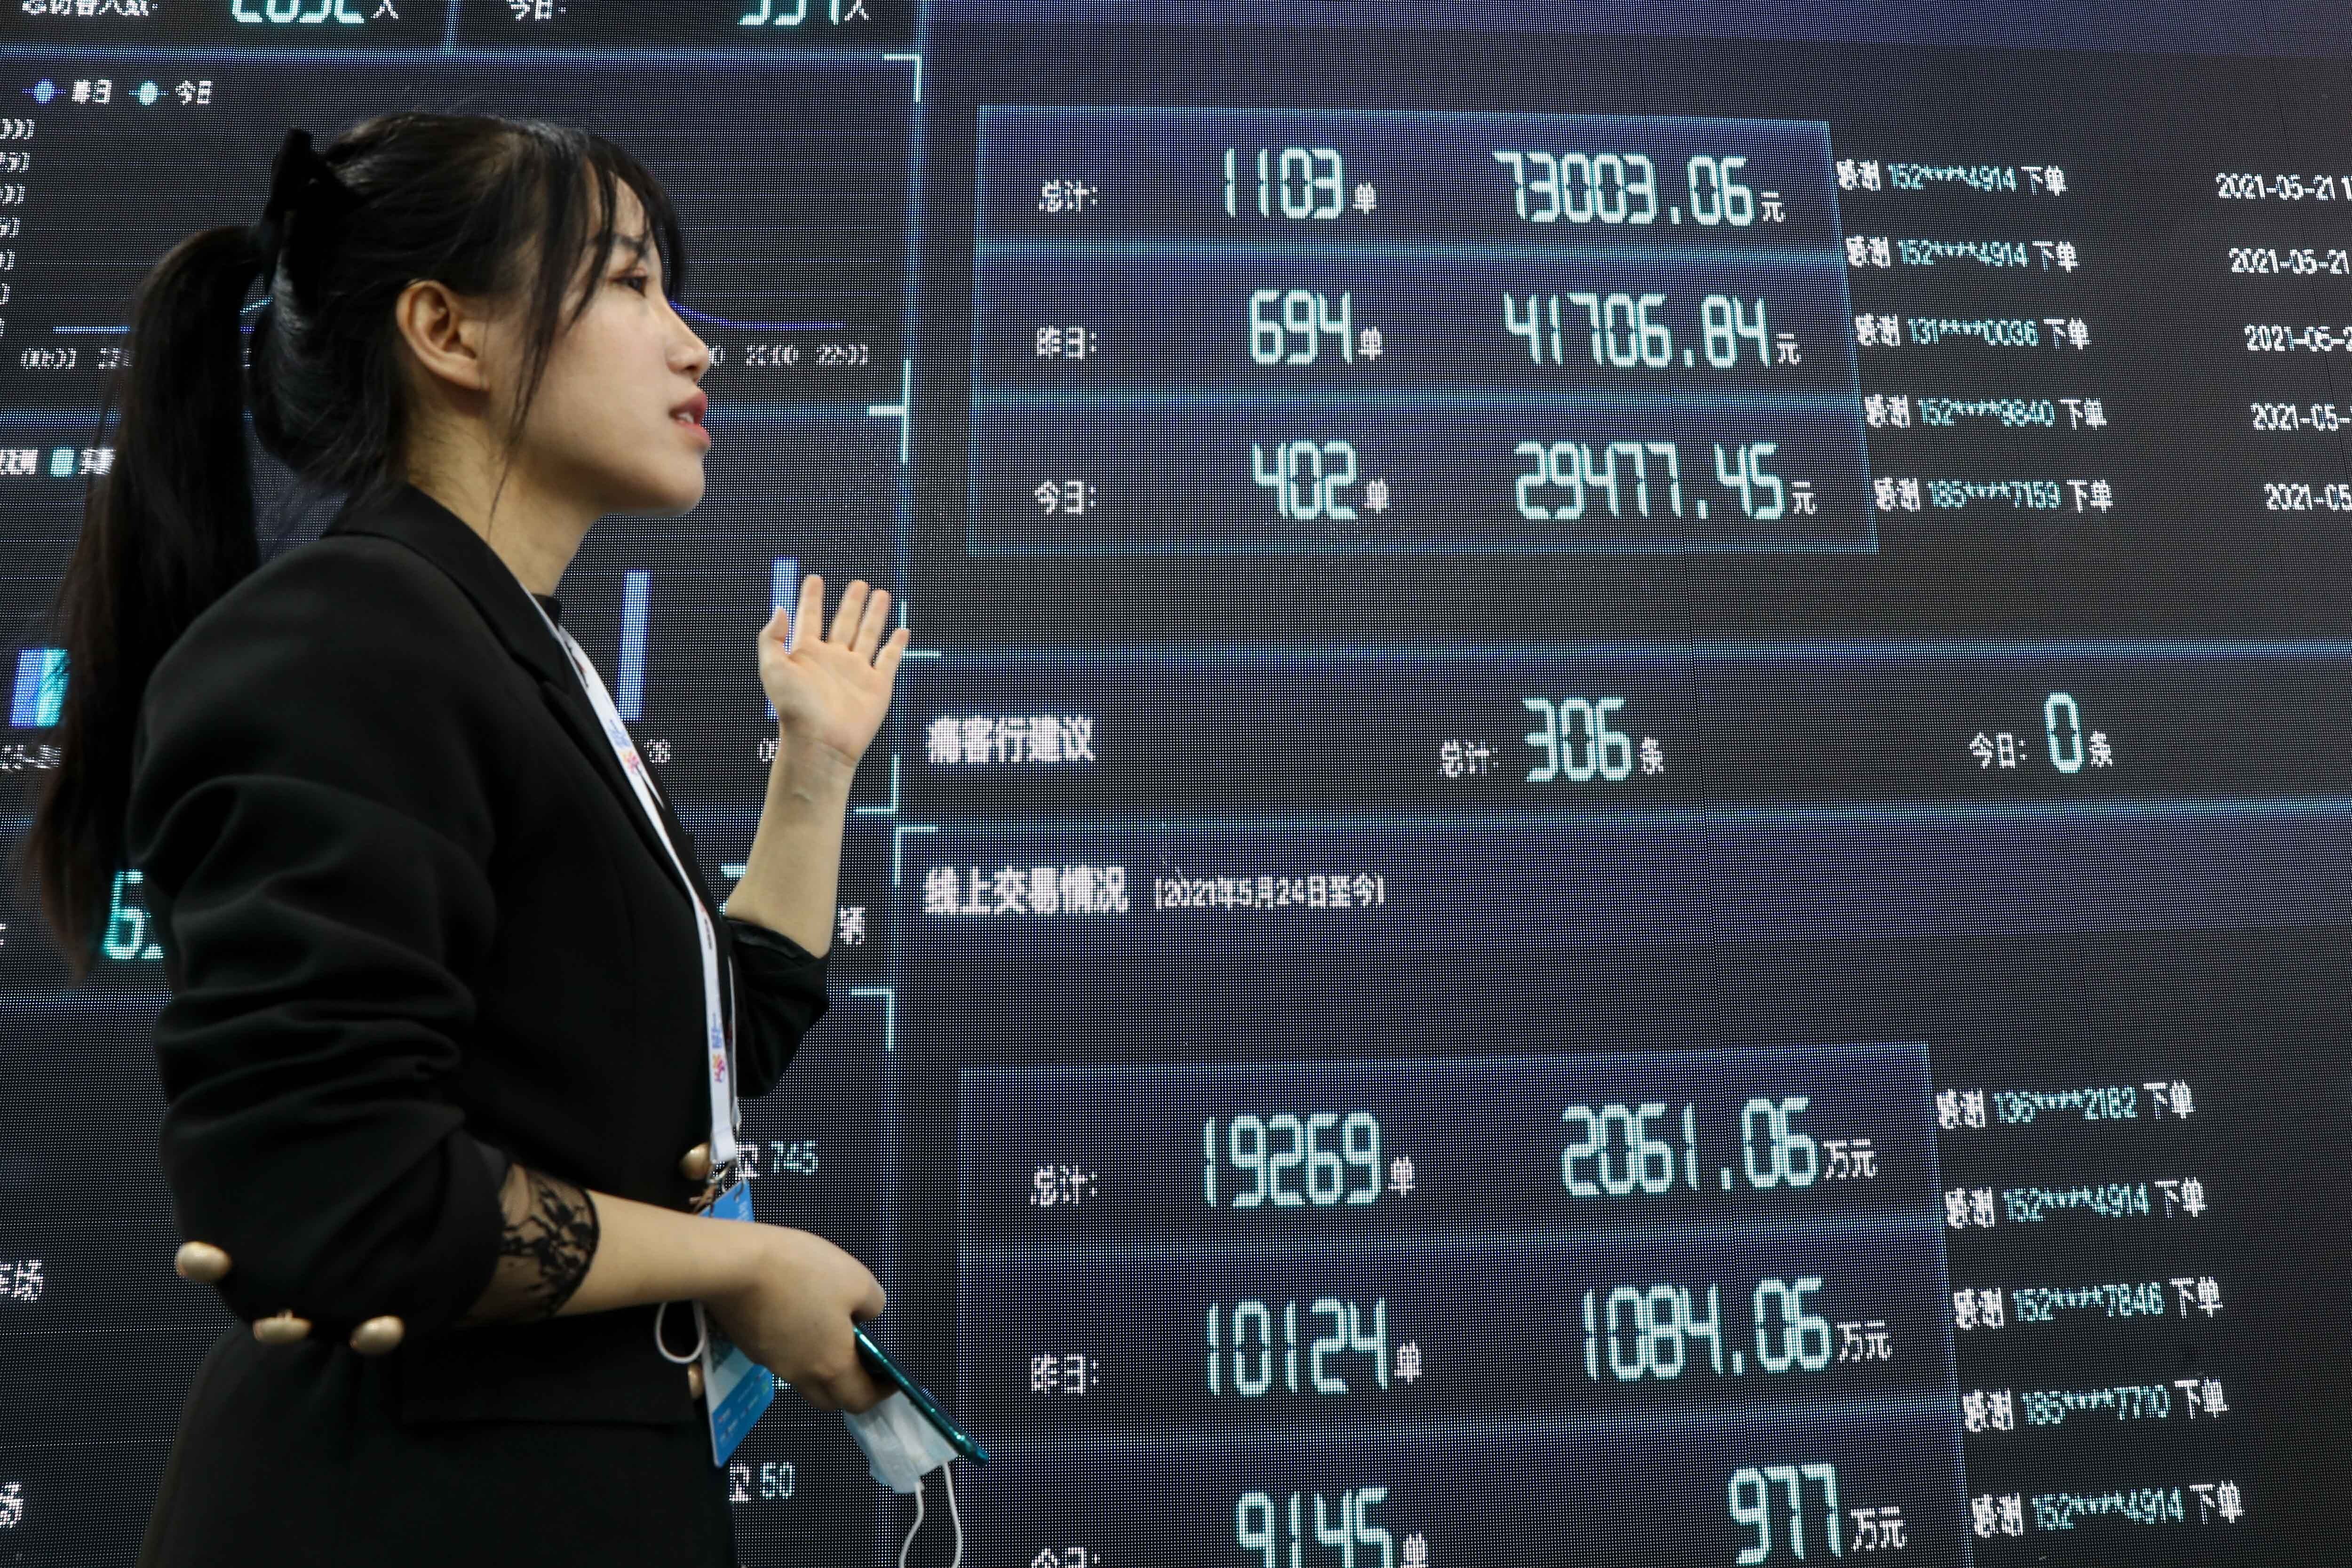 A staff member introduces data visualisation of smart business areas at the opening of the China International Big Data Industry Expo 2021 in Guiyang, capital of southwest China's Guizhou province, on May 26, 2021. Photo: Xinhua